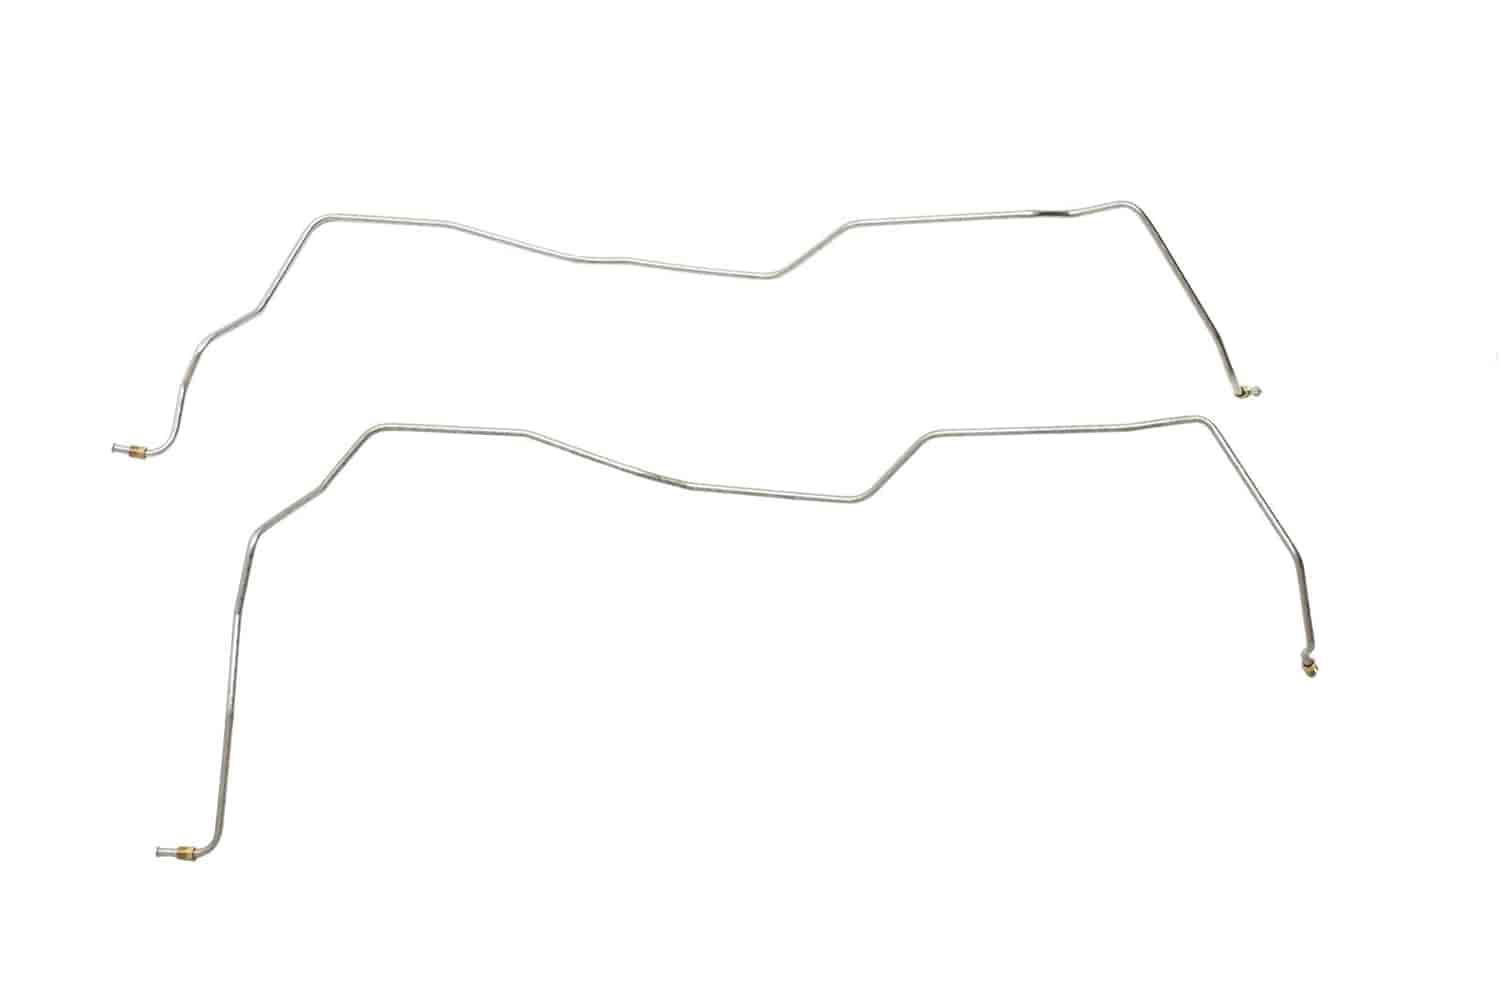 Chevy / GMC S series Jimmy Transmission Lines Sold In Pairs -1976 1977 1978 1979